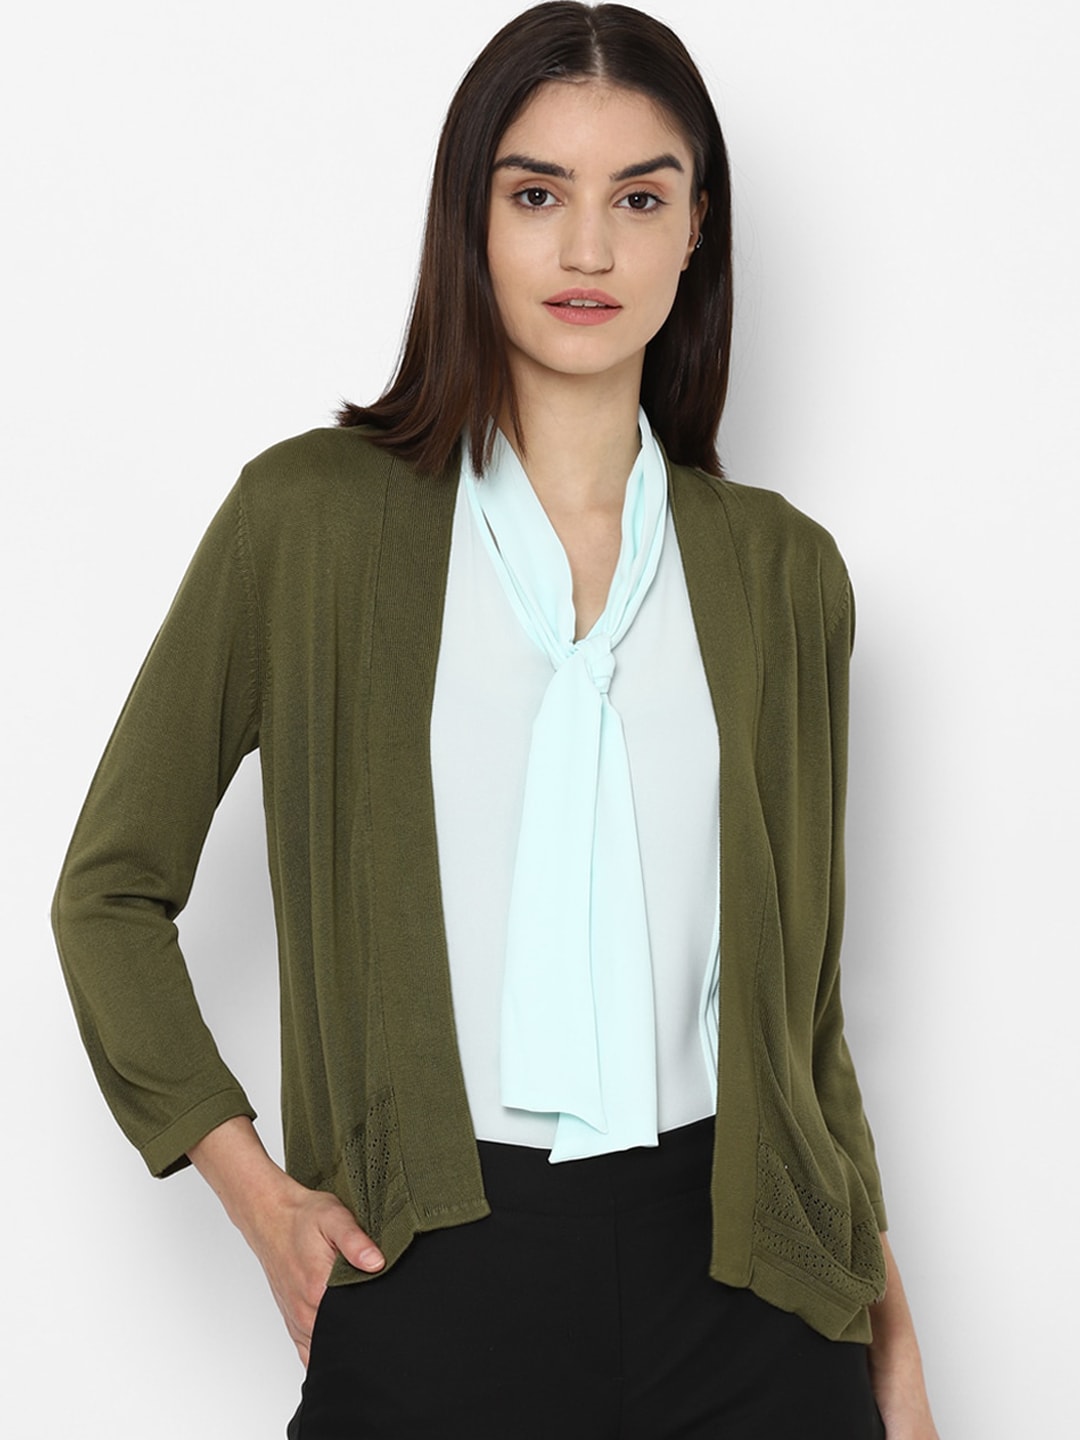 Allen Solly Woman Women Olive Green Geometric Open Front Jacket Price in India